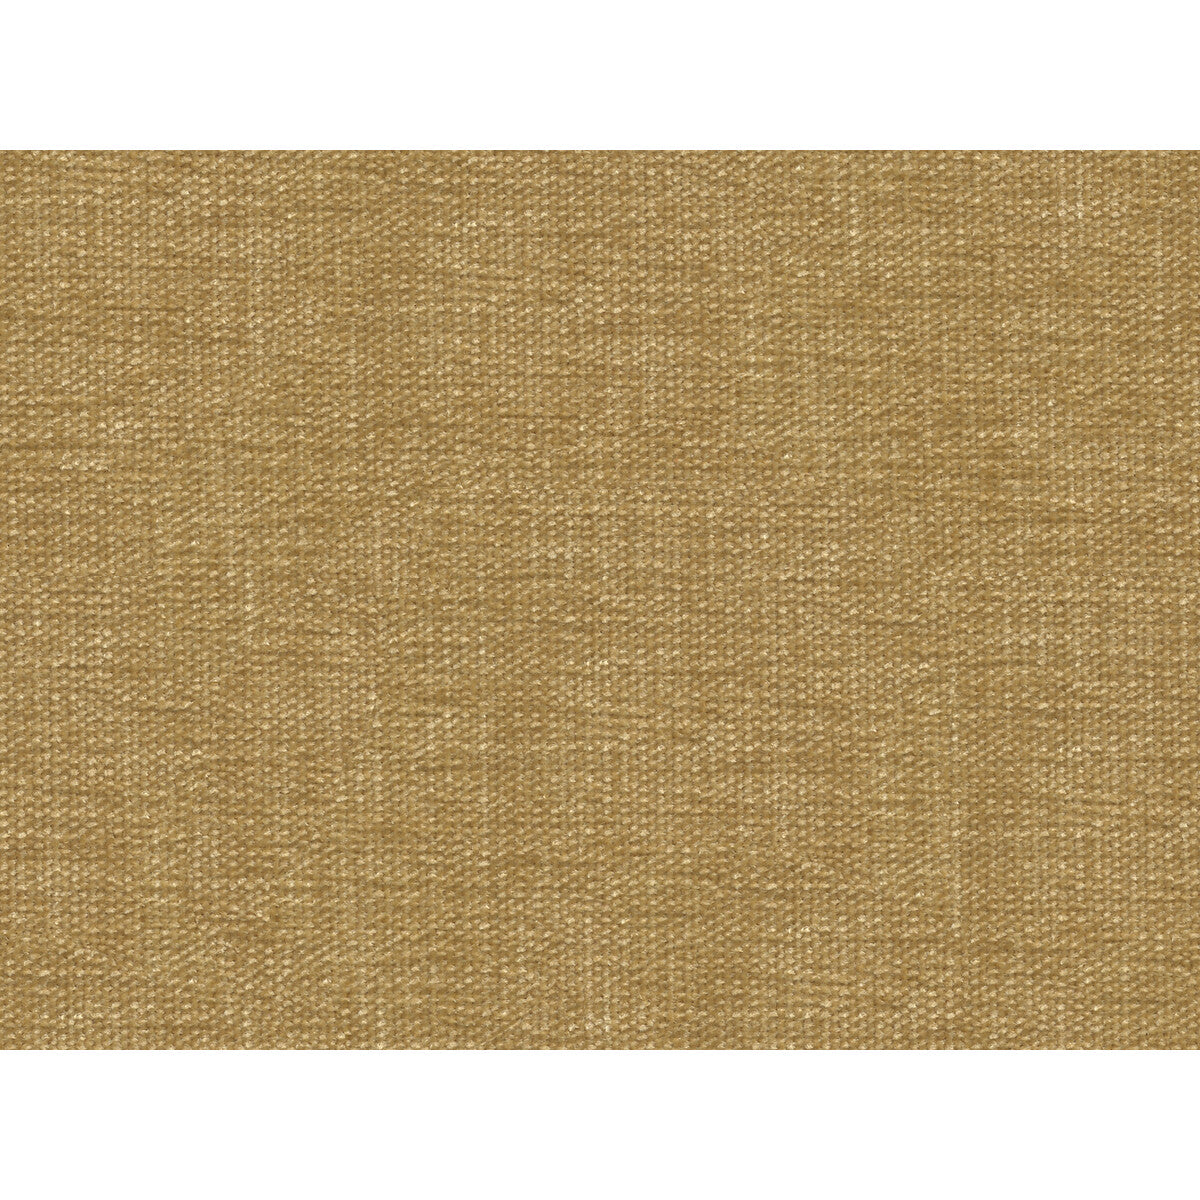 Kravet Contract fabric in 34961-416 color - pattern 34961.416.0 - by Kravet Contract in the Performance Kravetarmor collection